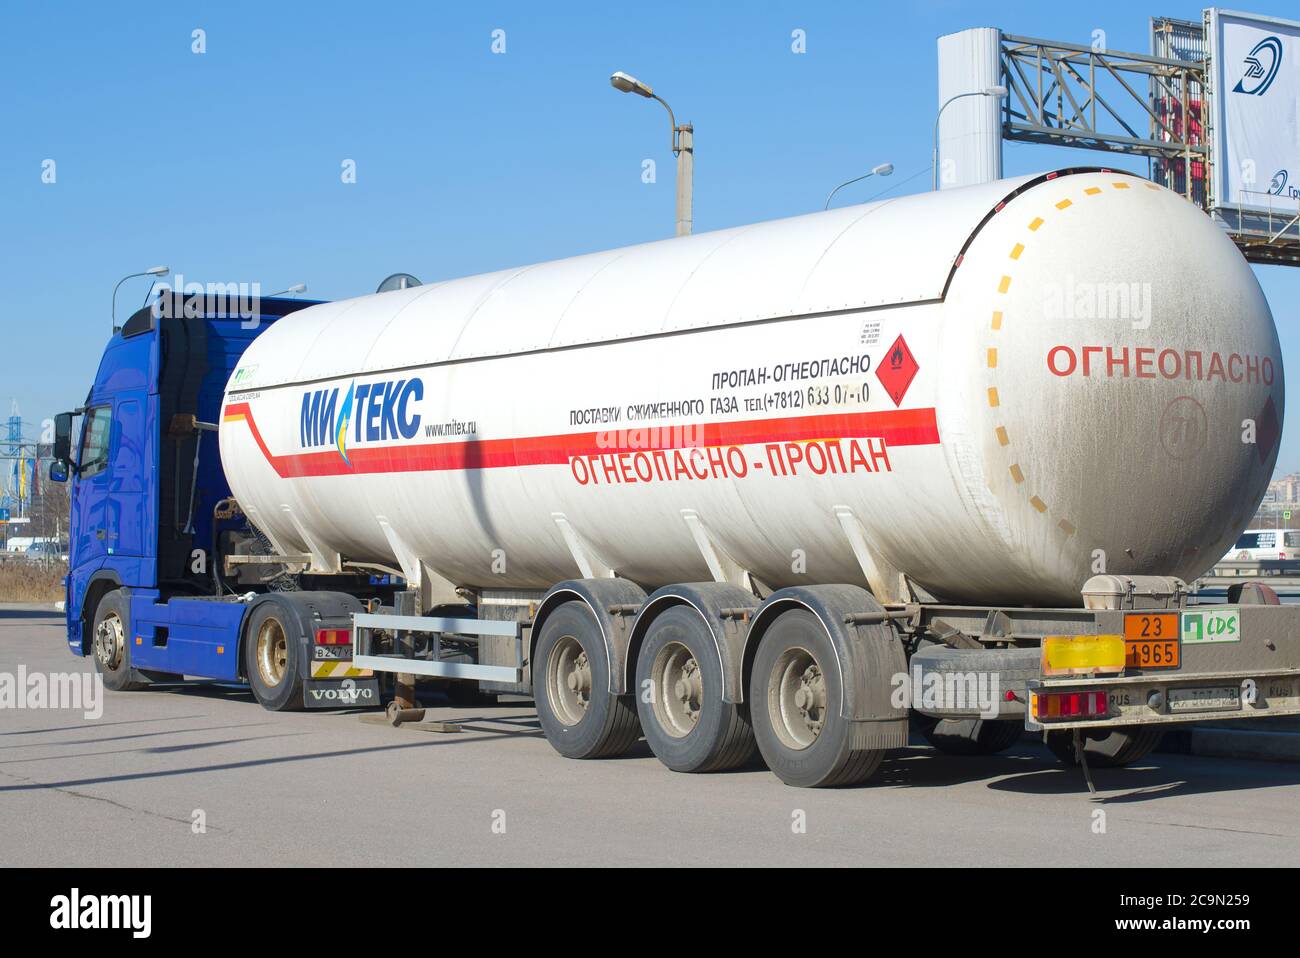 ST. PETERSBURG, RUSSIA - APRIL 12, 2018: The tank for transportation of the liquefied gas close up Stock Photo